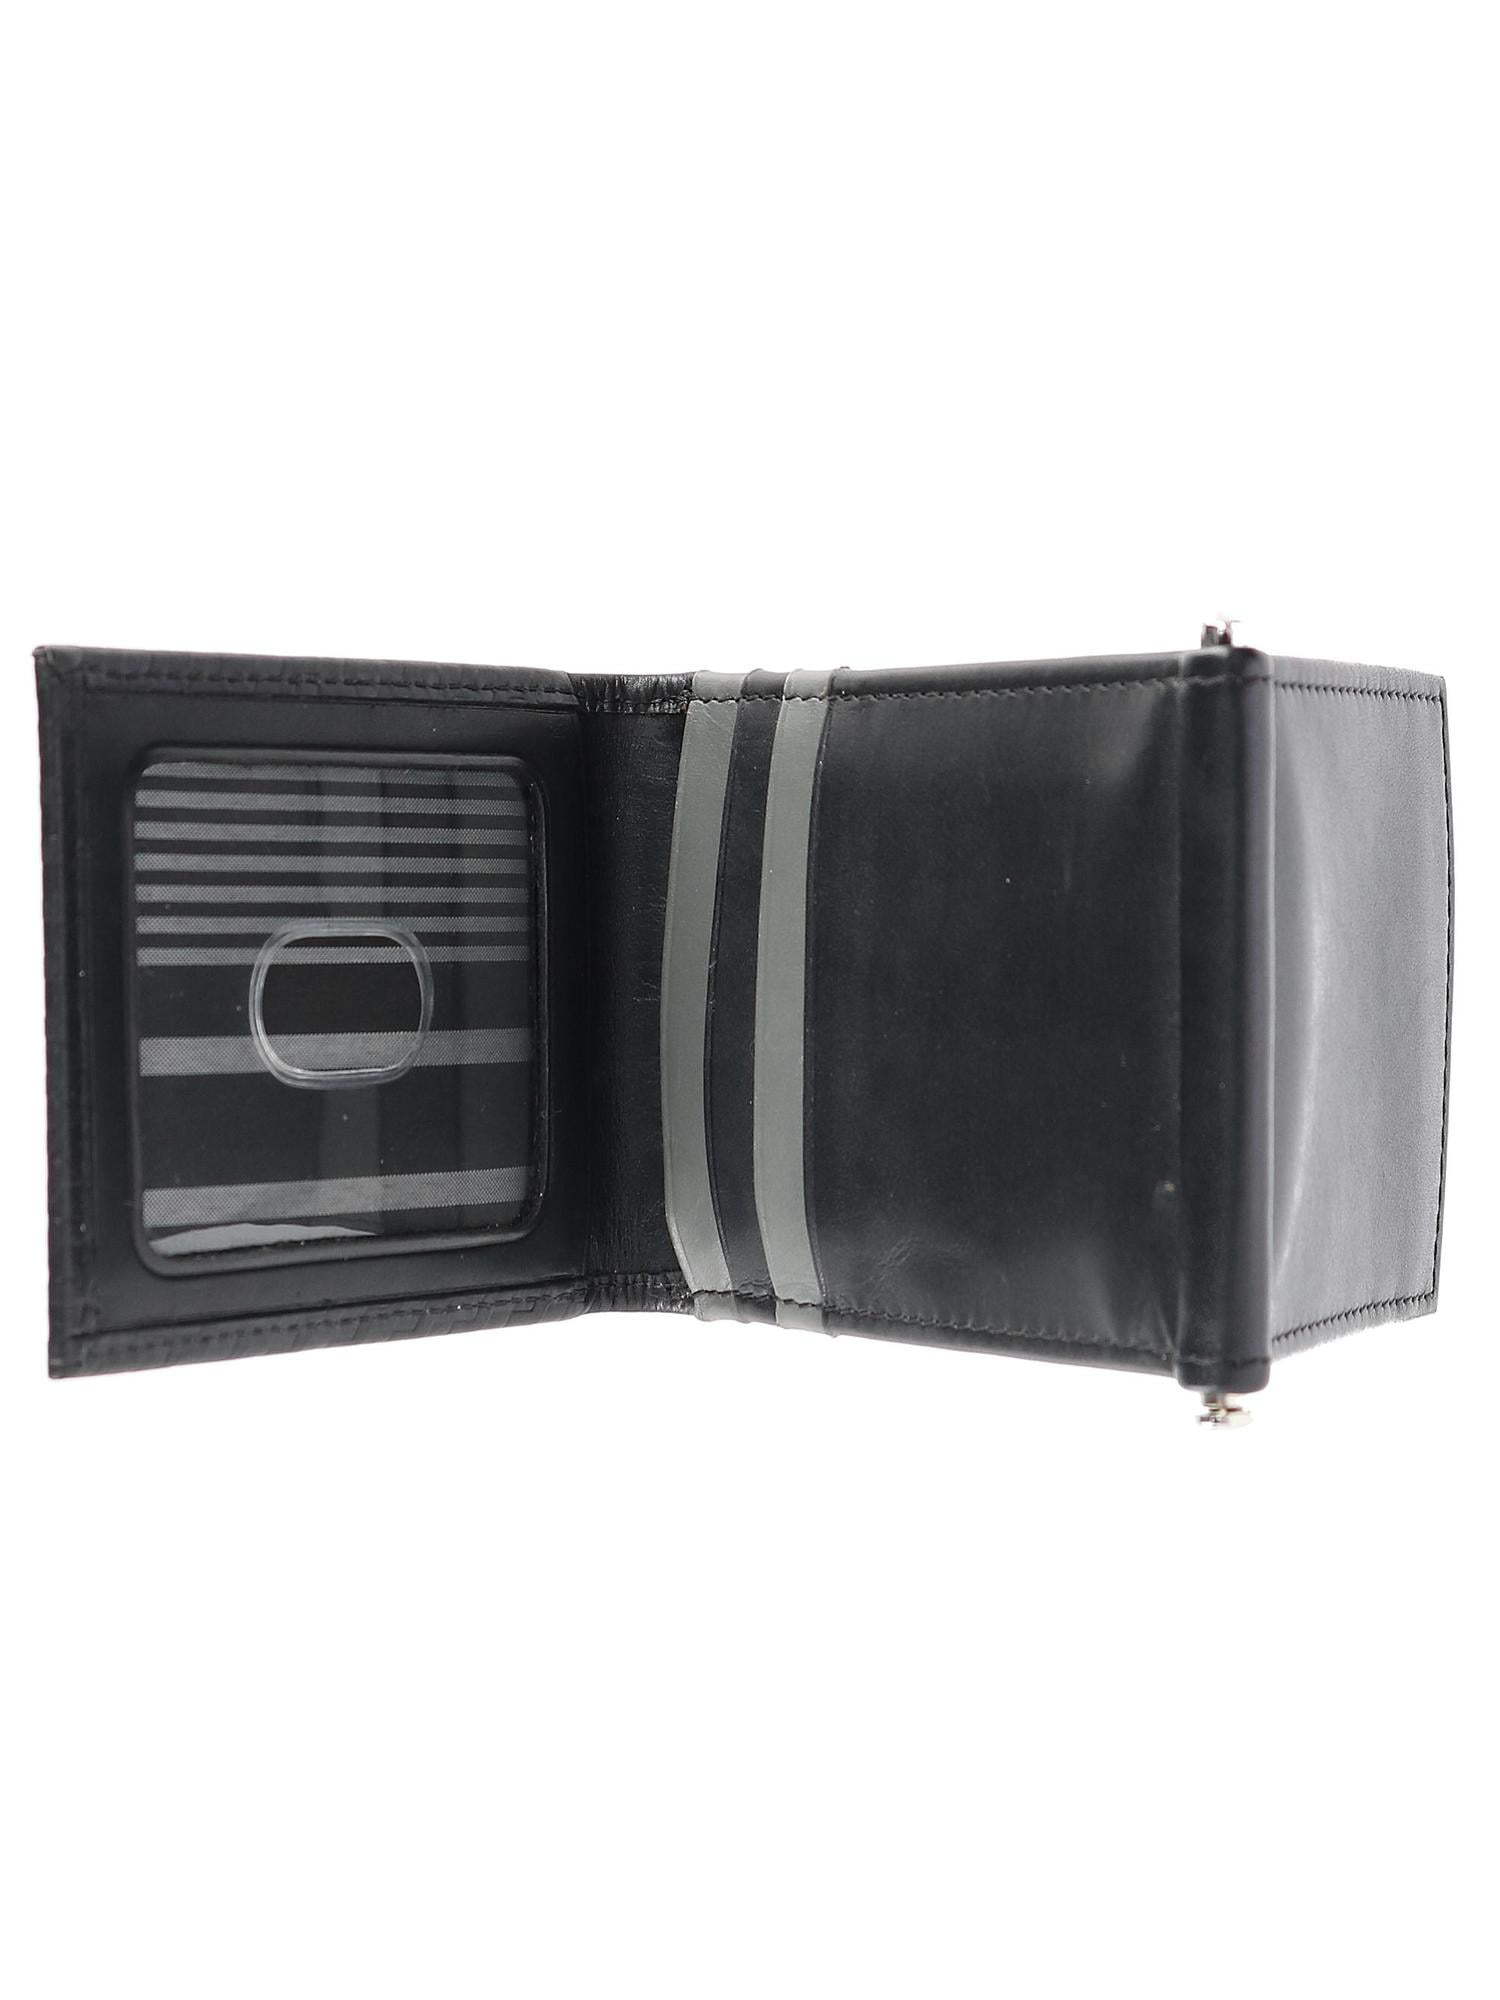 Buxton Men's Bellamy RFID Blocking Leather Z-Fold Wallet with Money Clip 